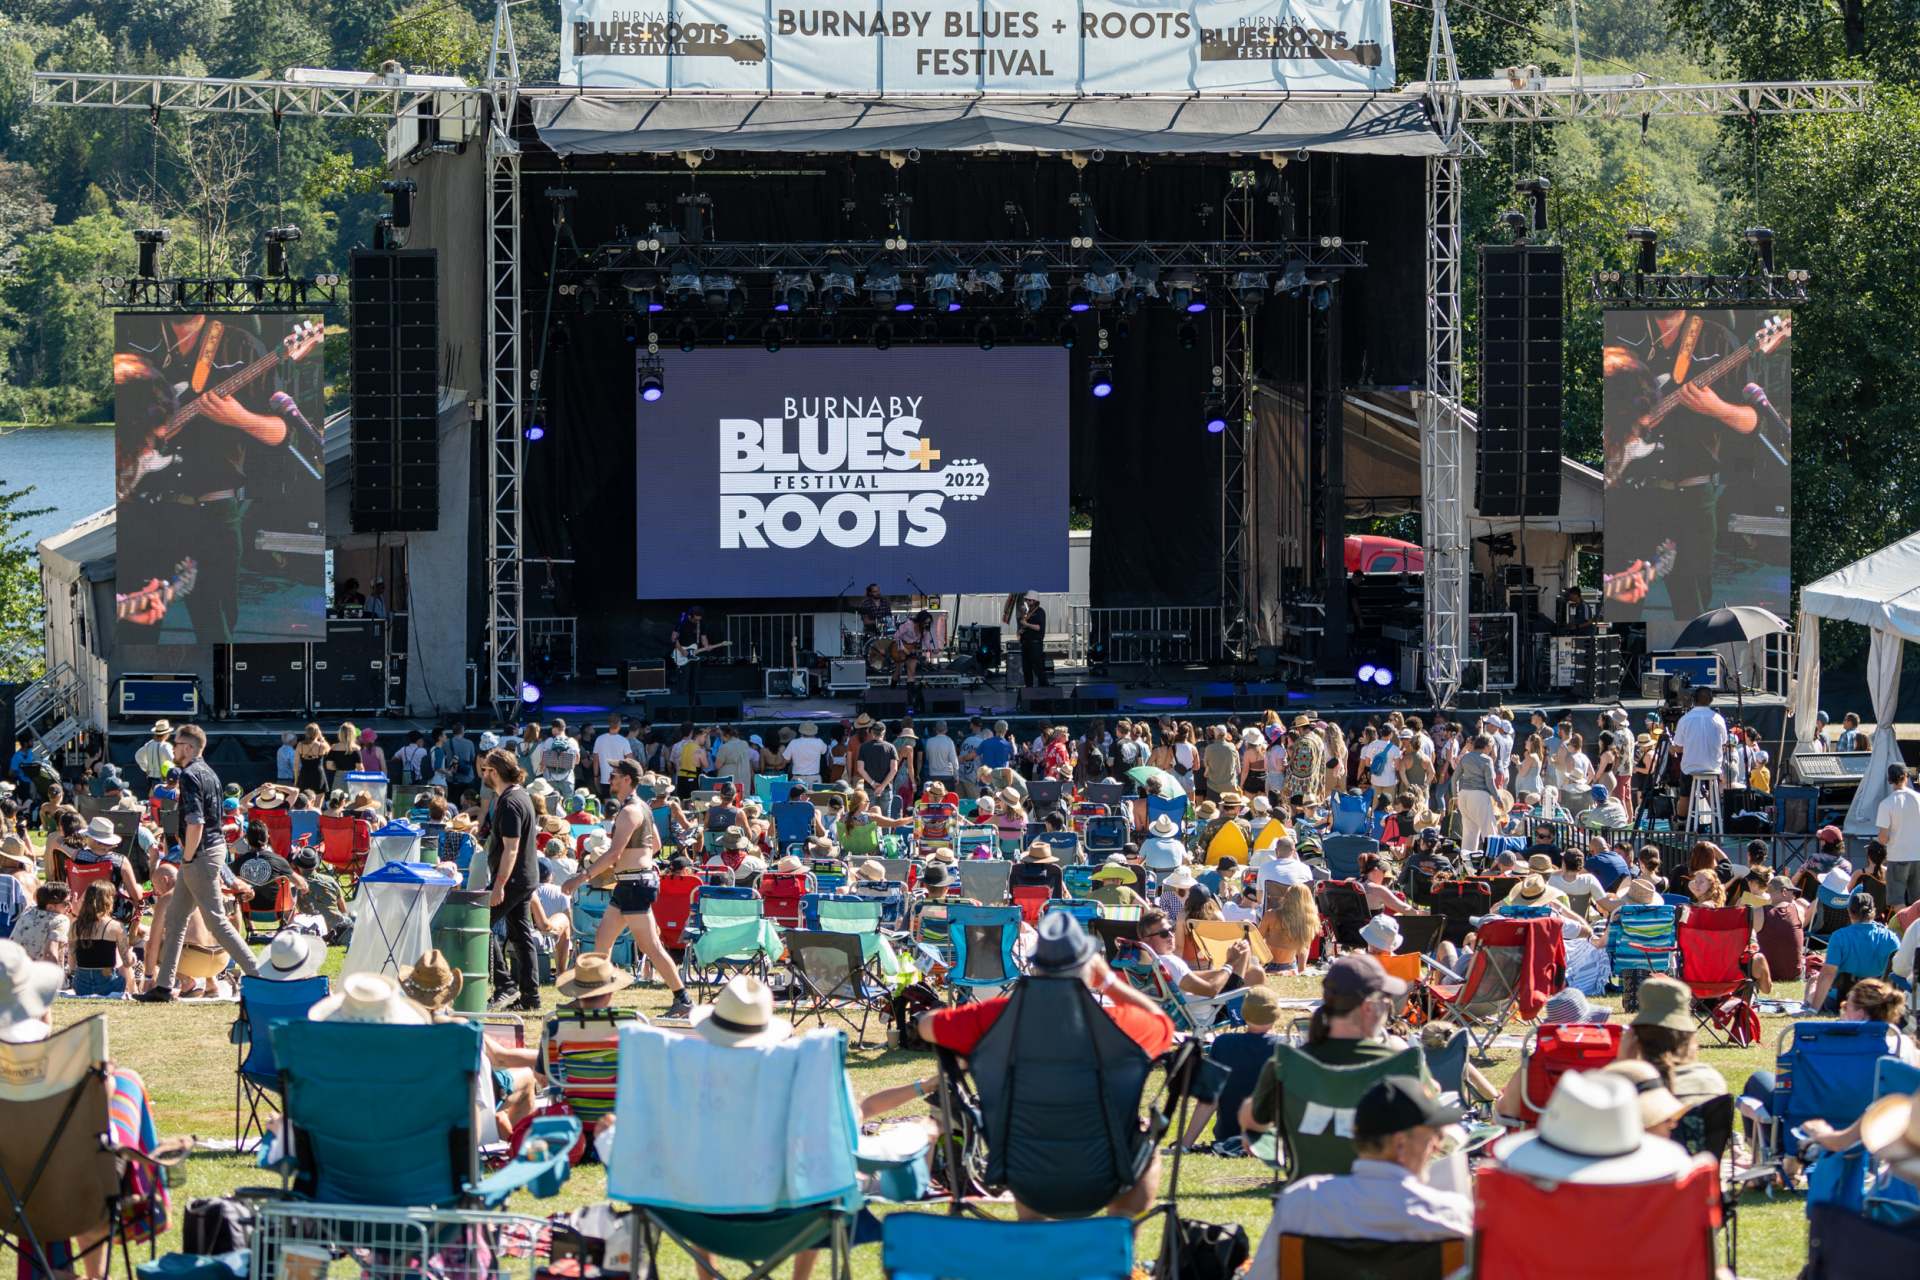 Burnaby Blues + Roots Festival: A Day of Soul-Stirring Music and